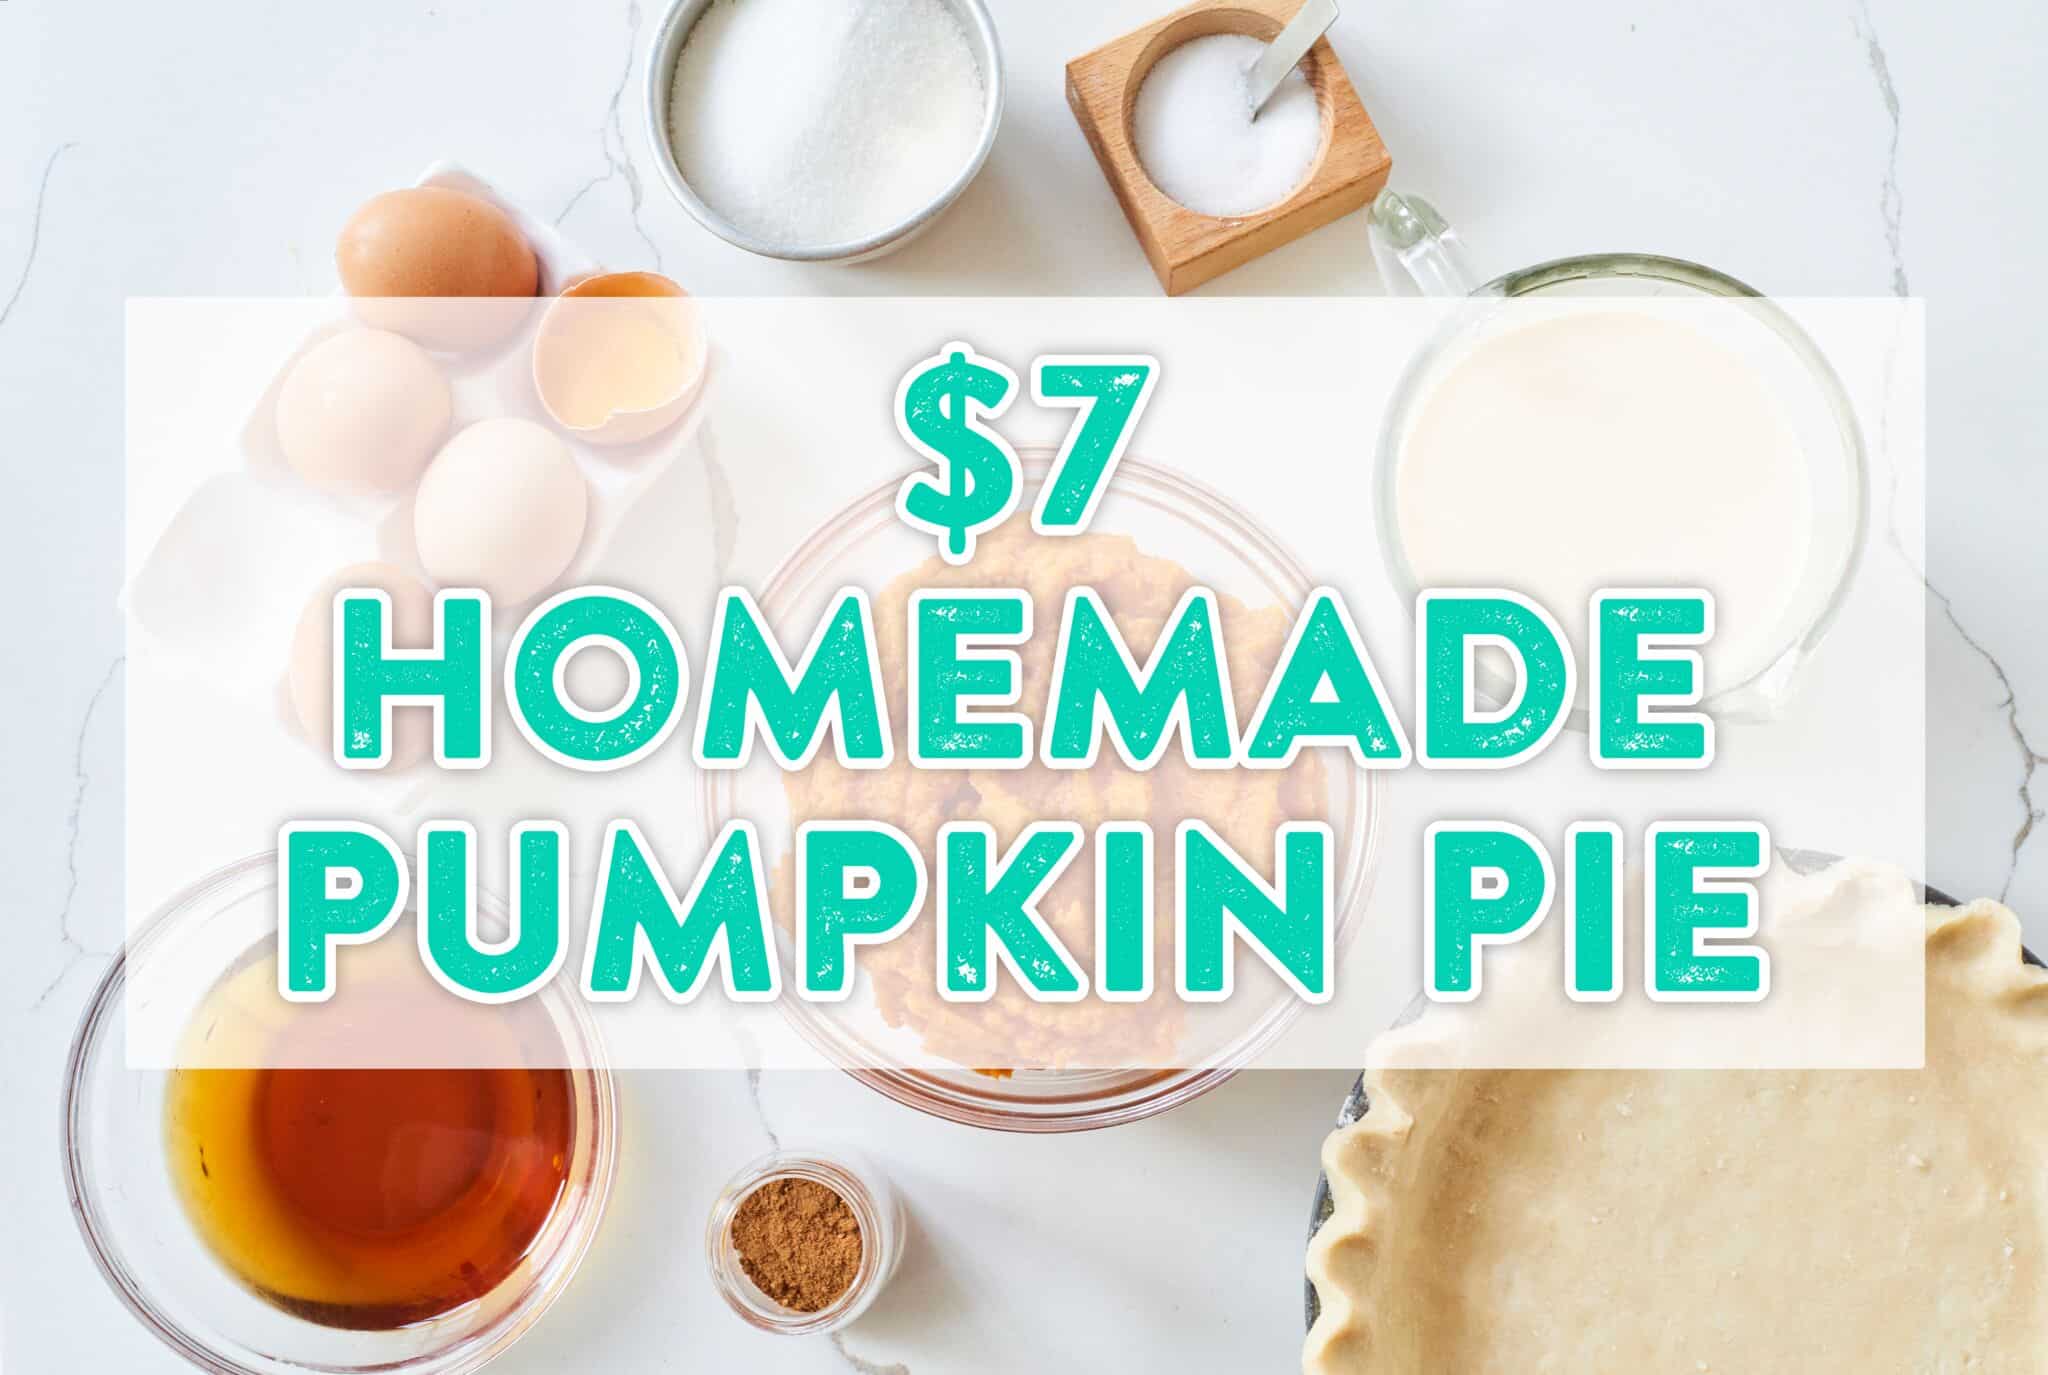 An image of ingredients for pumpkin pie with the title "$7 Homemade Pumpkin Pie" overlaid.